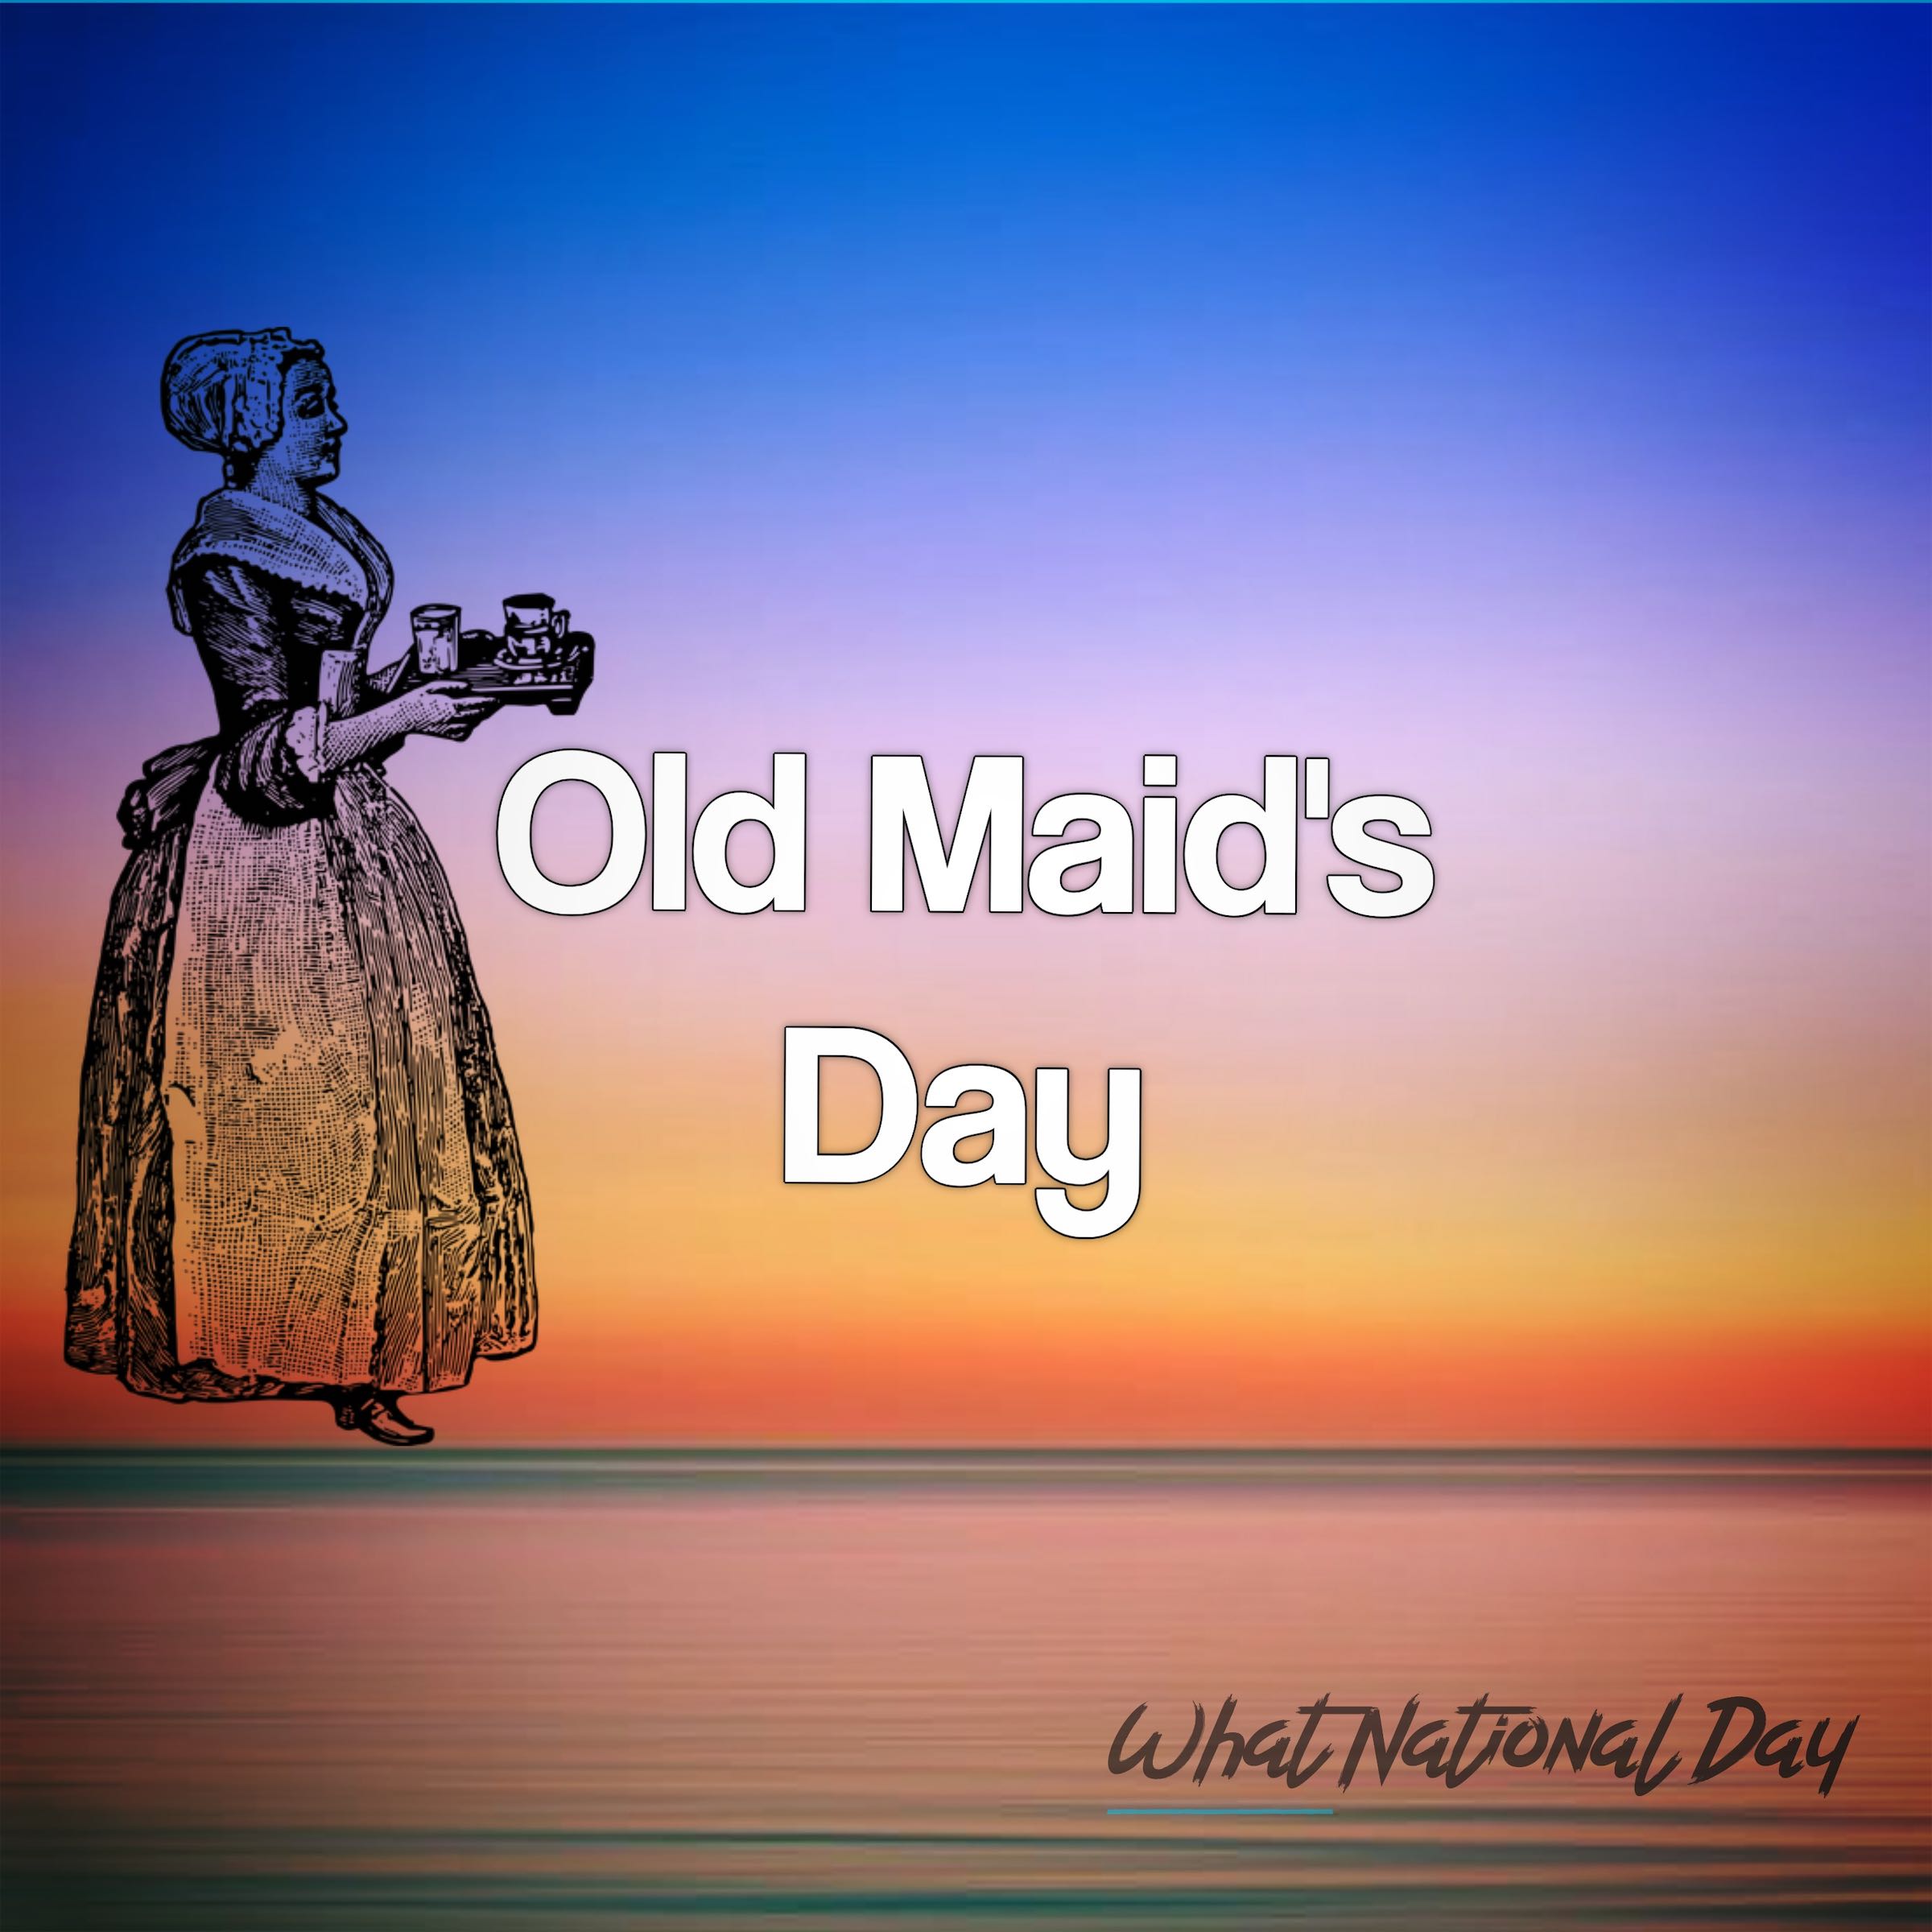 Old Maid's Day